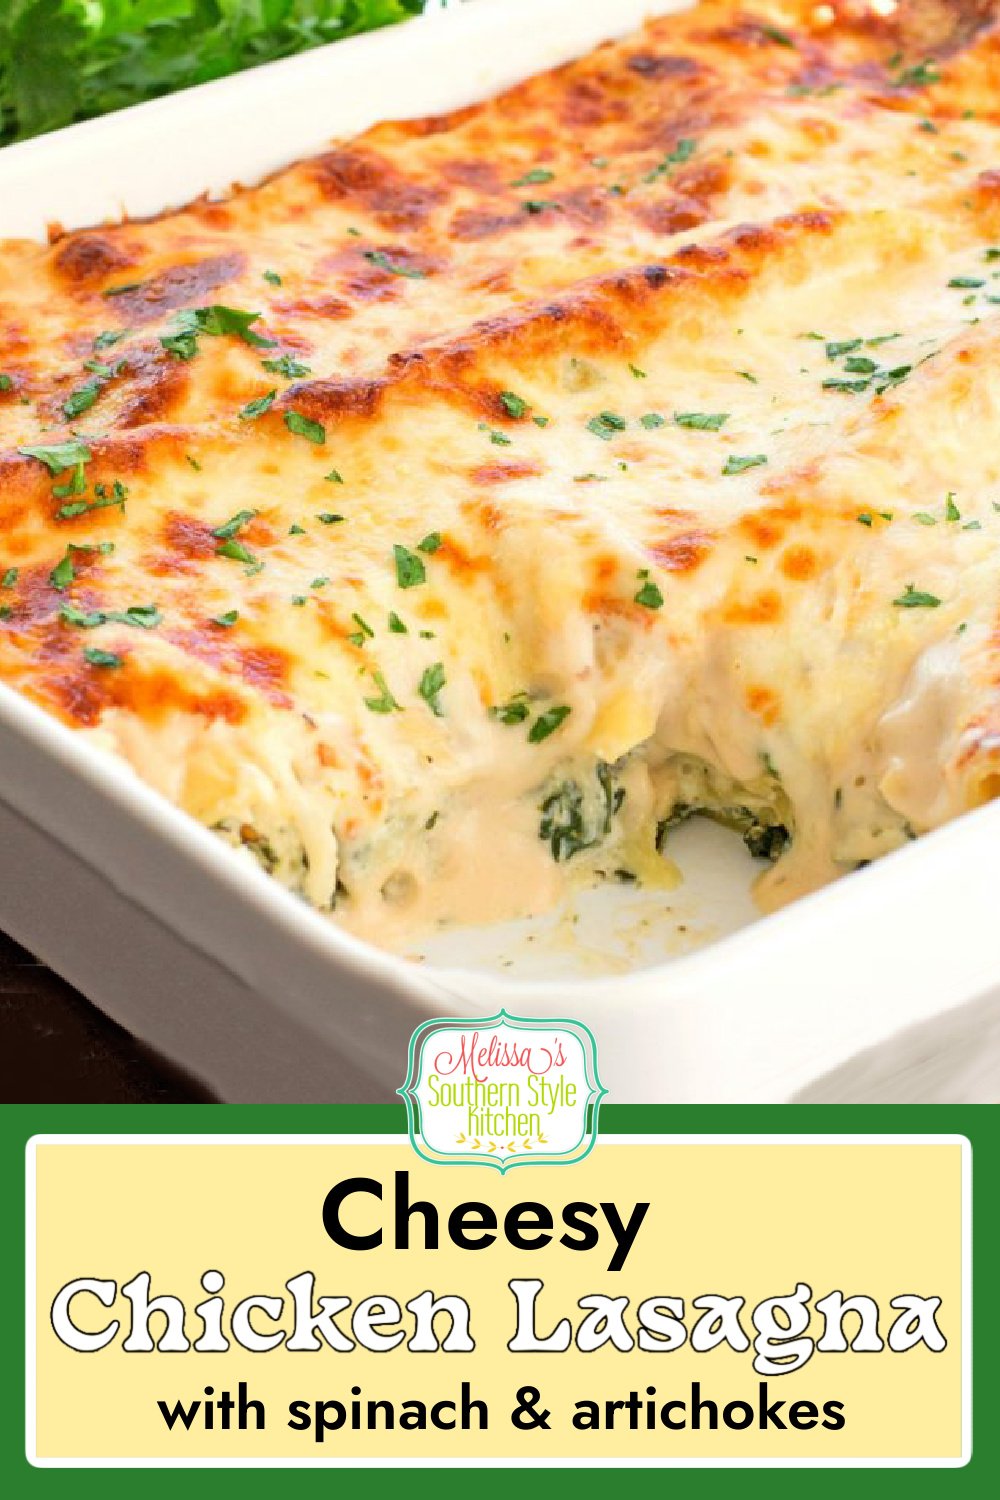 The same flavors you love in spinach artichoke dip shine in this Cheesy Chicken Spinach Artichoke Lasagna #chickenlasagna #easychickenrecipes #chickenbreastrecipes #chicken #cheesy #lasagna #pastarecipes #spinachdip #artichokes #southernrecipes #dinnerideas via @melissasssk